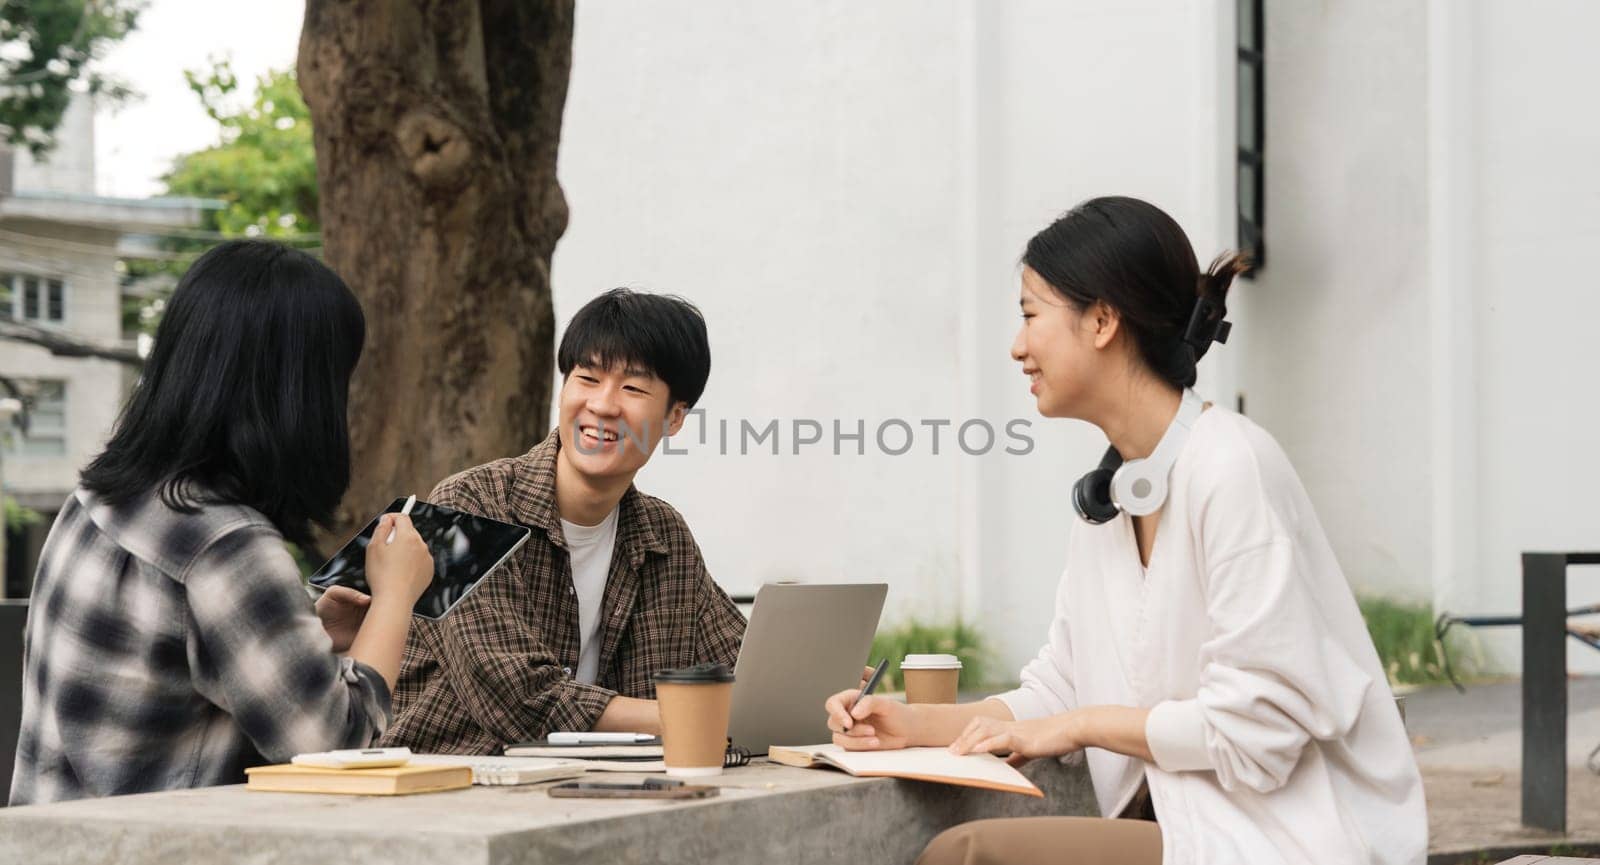 Group of happy young Asian college students sitting on a on the cement table, looking at a laptop screen, discussing and brainstorming on their university project together by nateemee